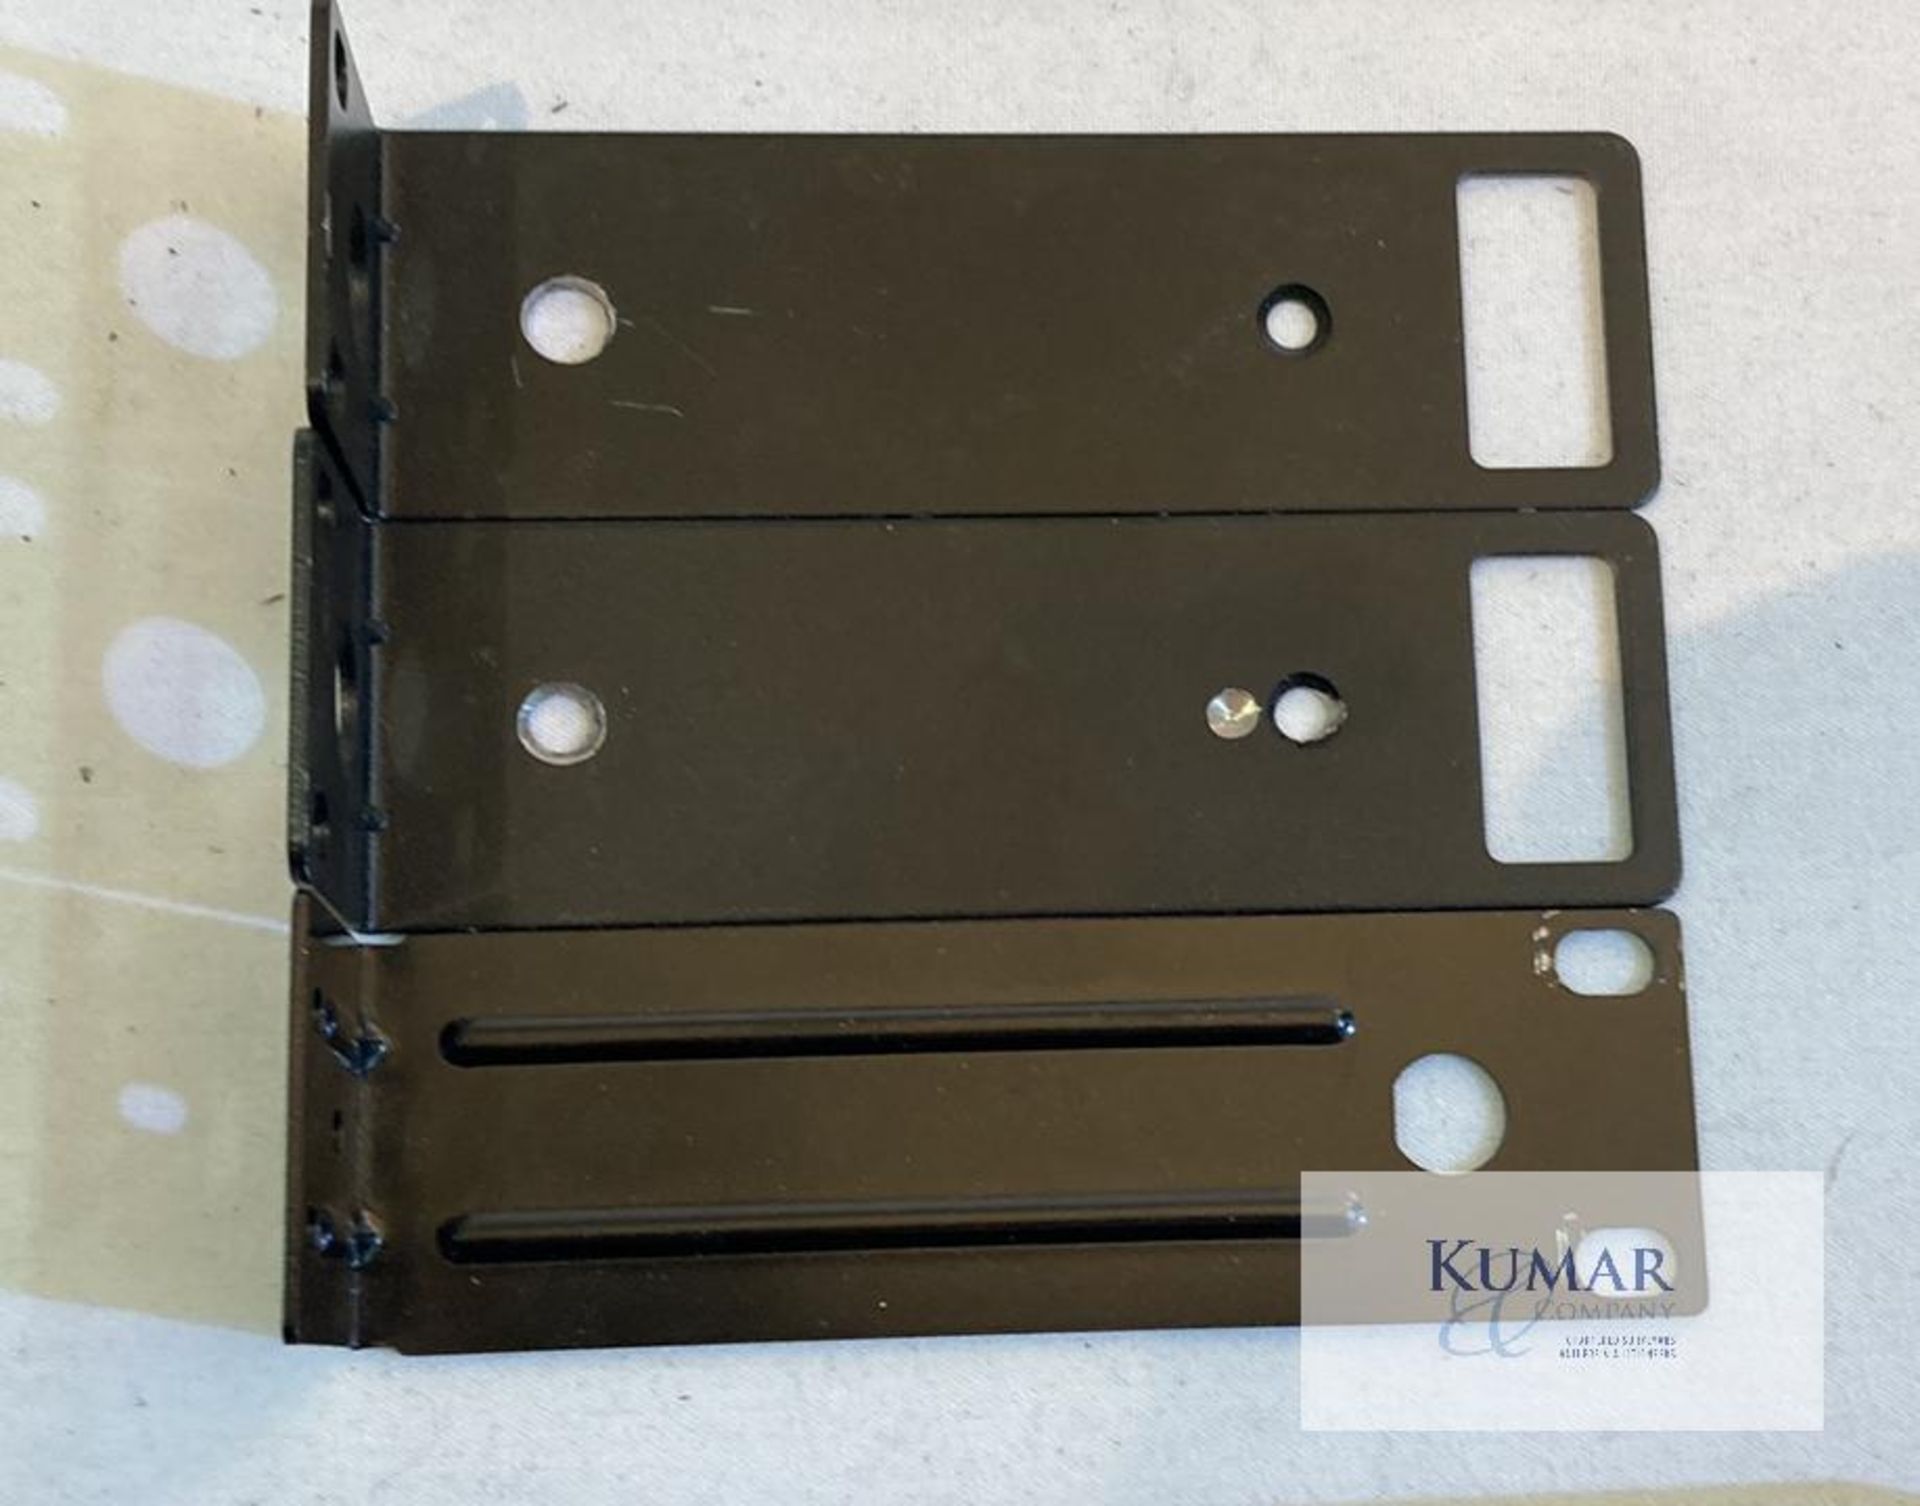 19" rack blanking plate and mounting assortment Description: Assortment of 19" blanking plates - Image 12 of 15